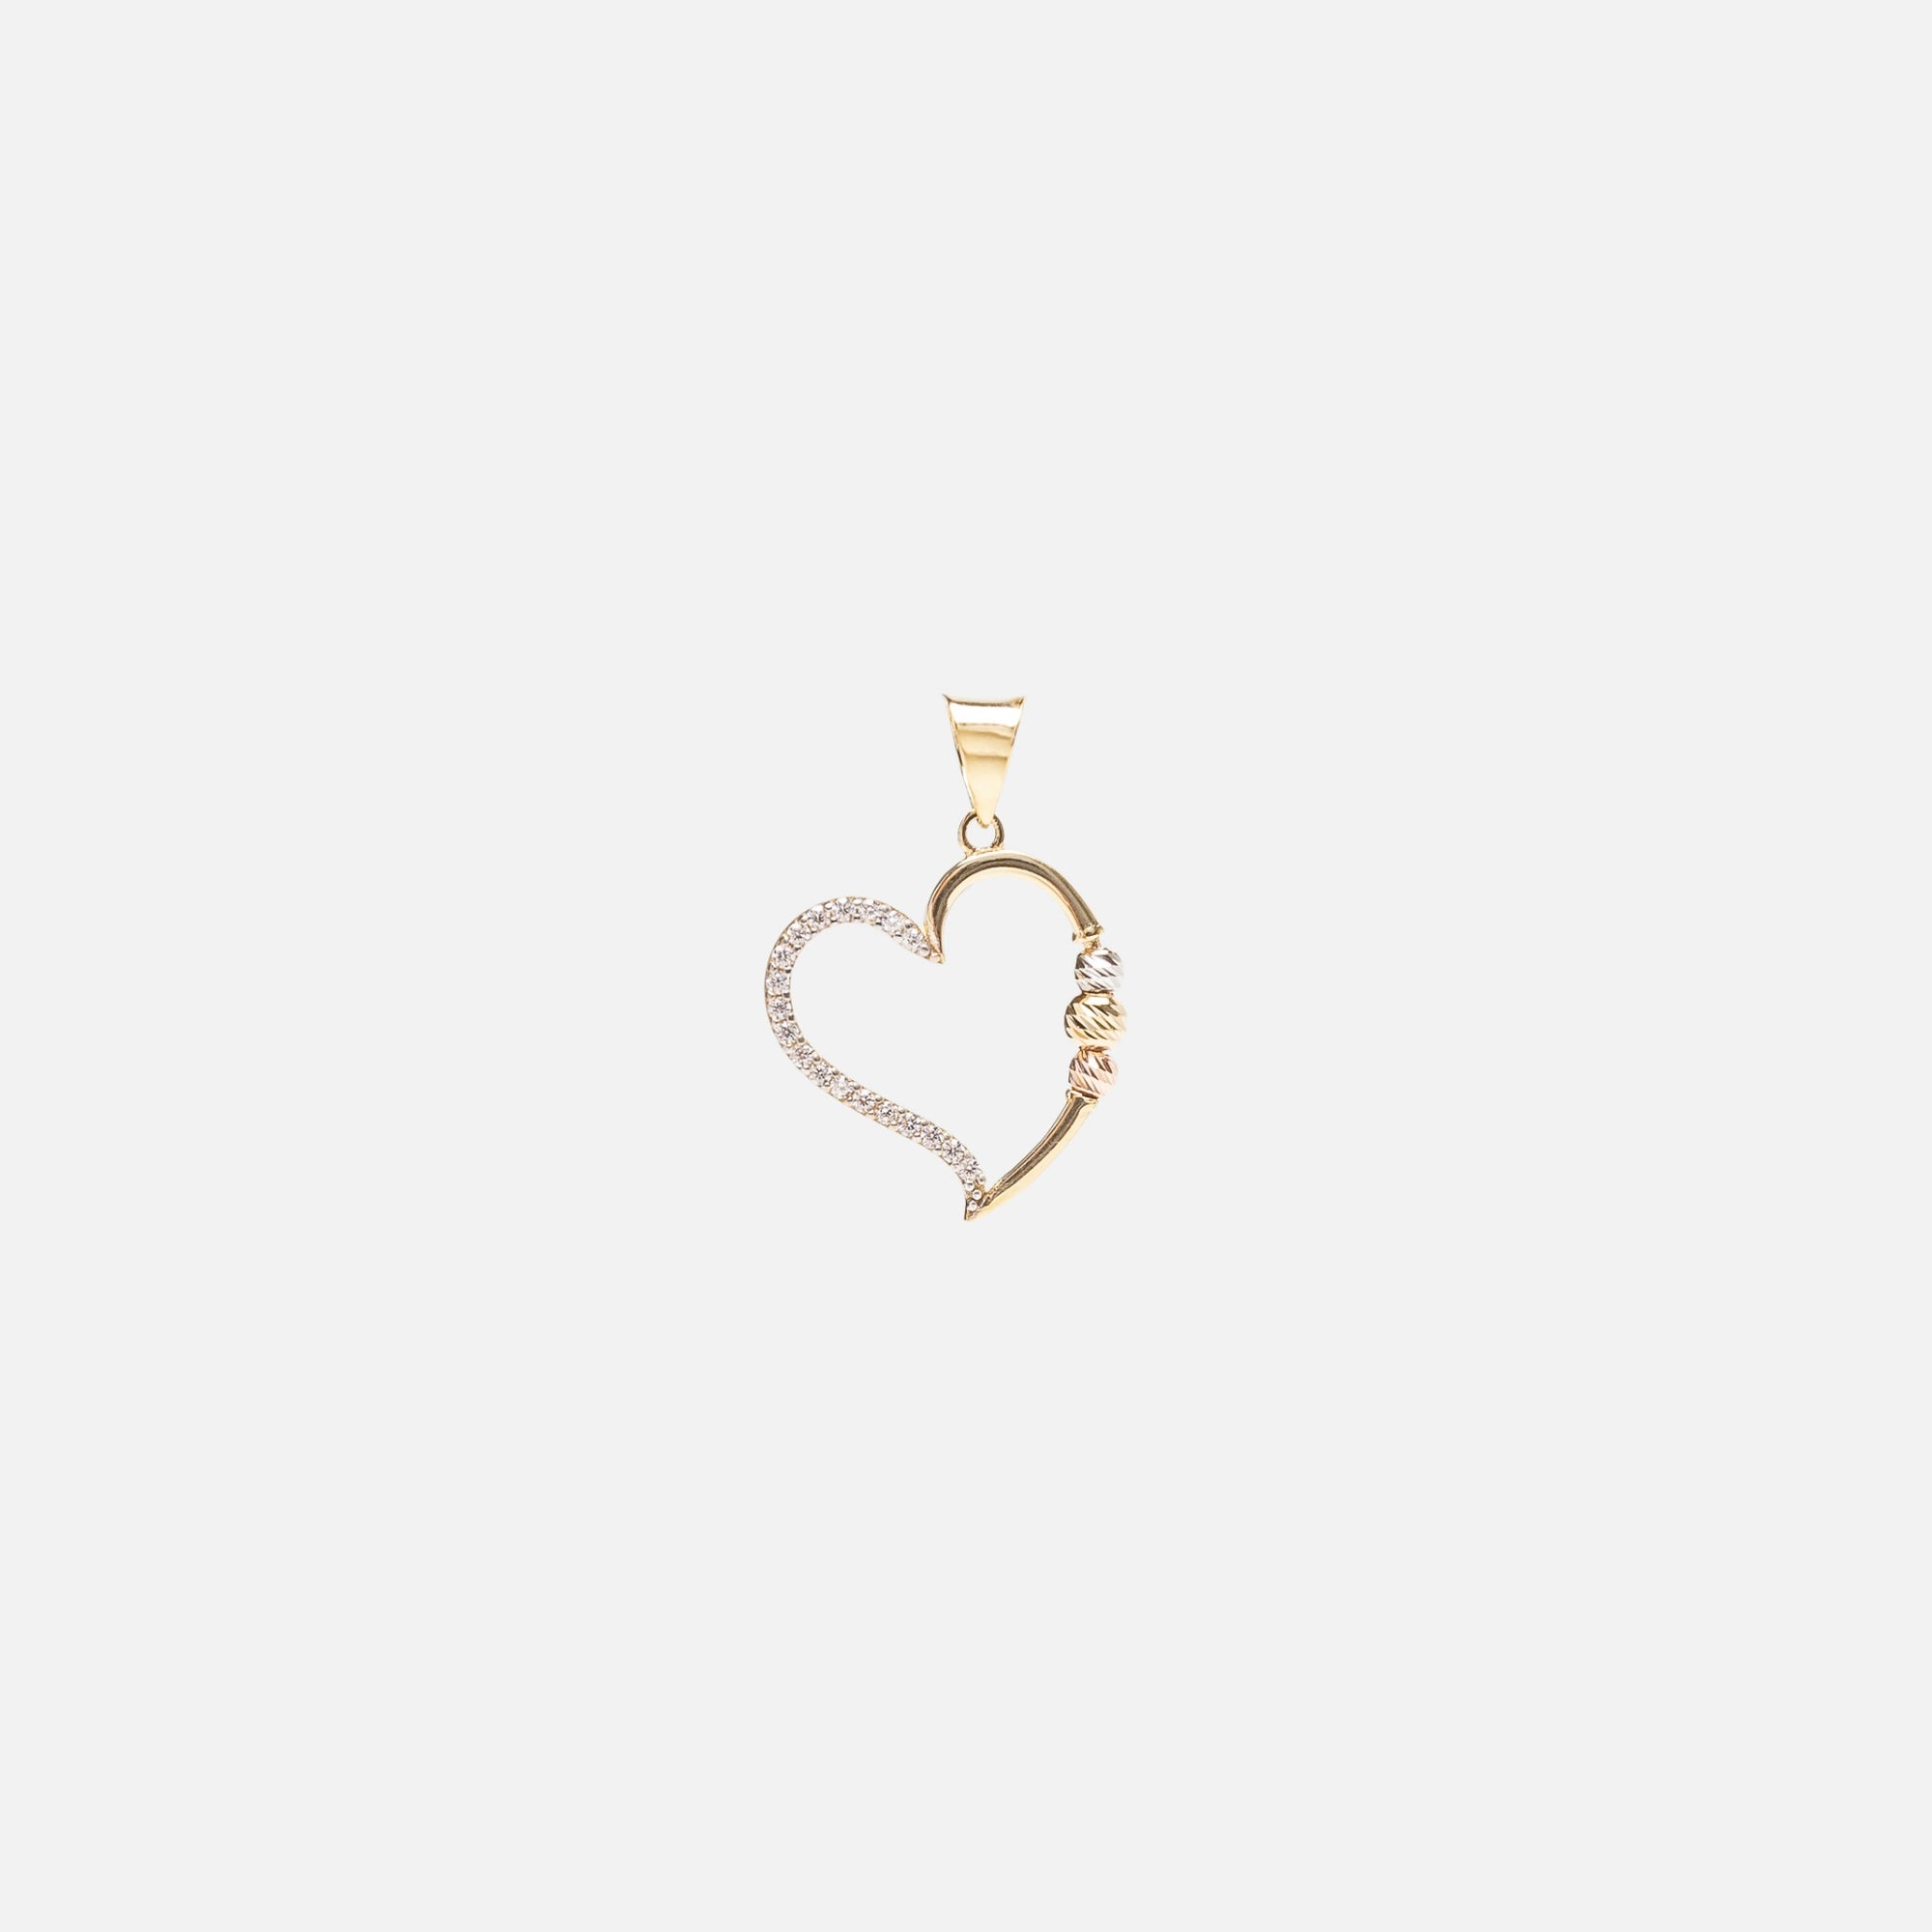 10k yellow gold heart charm with stones details